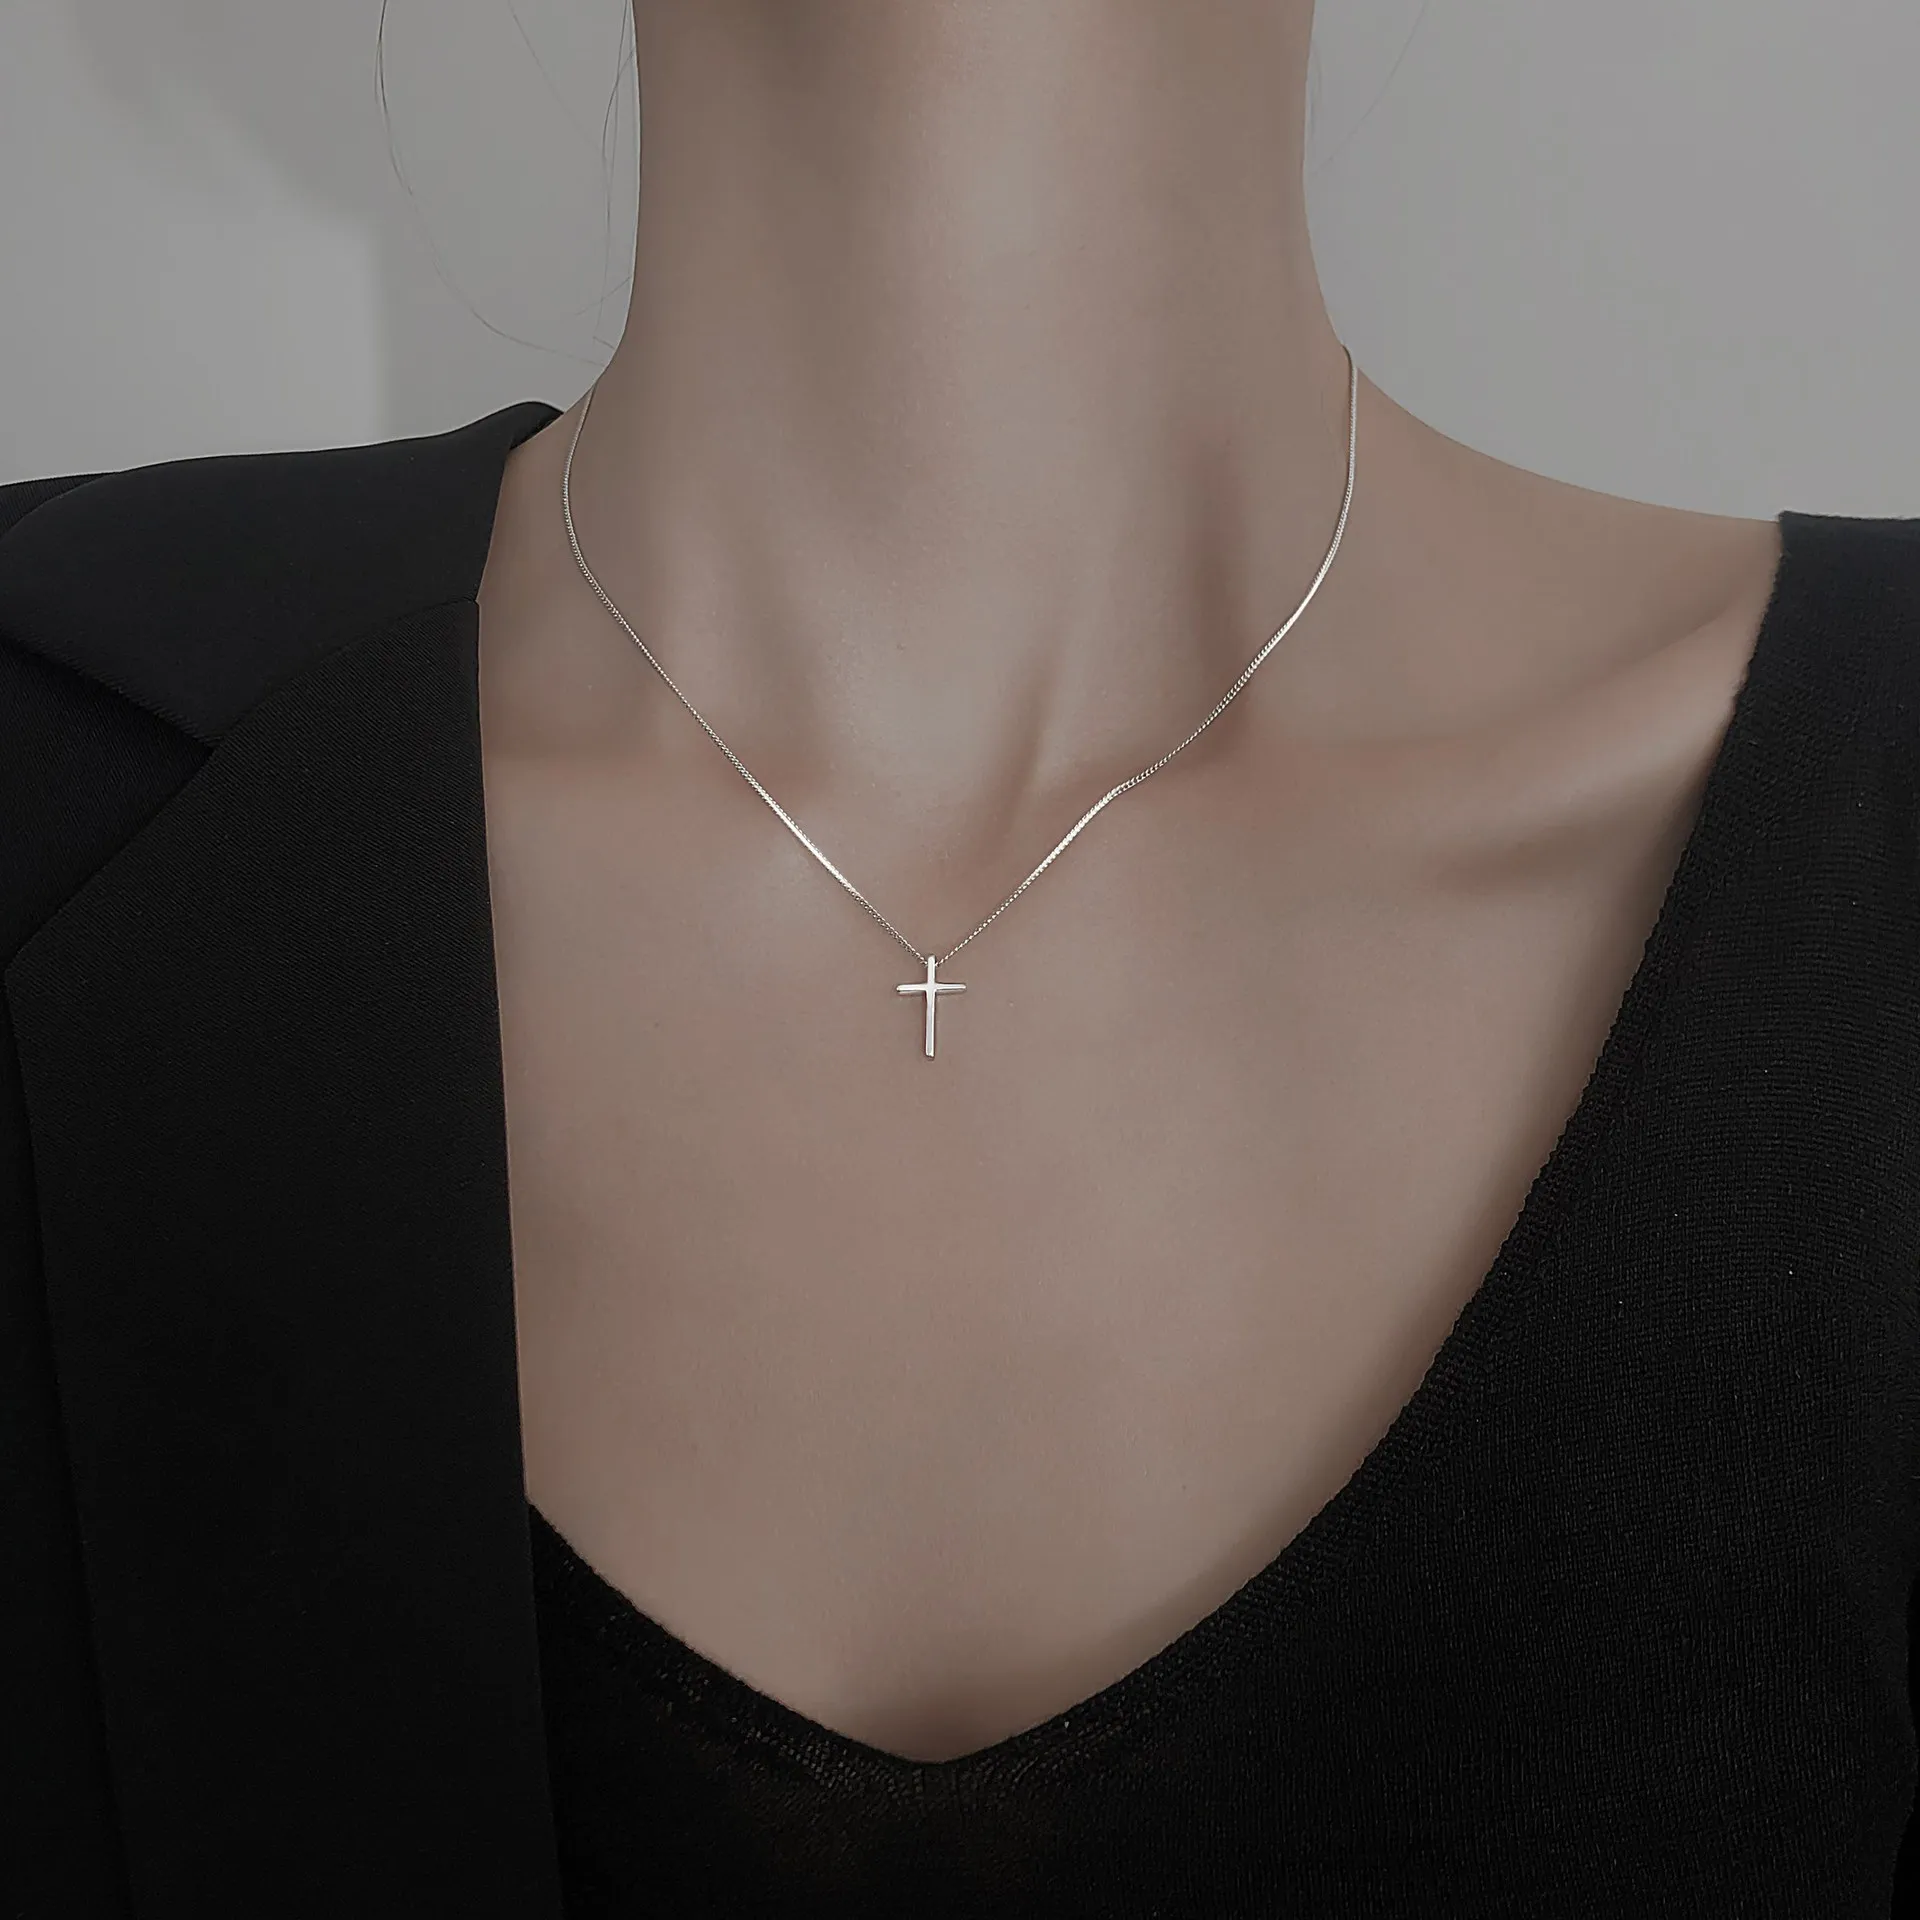 

R.GEM. Gold Plated Women Girl Gift Fashion Simple Chic Jewelry S925 Sterling Silver Charm Chain Choker Cross Pendant Necklace